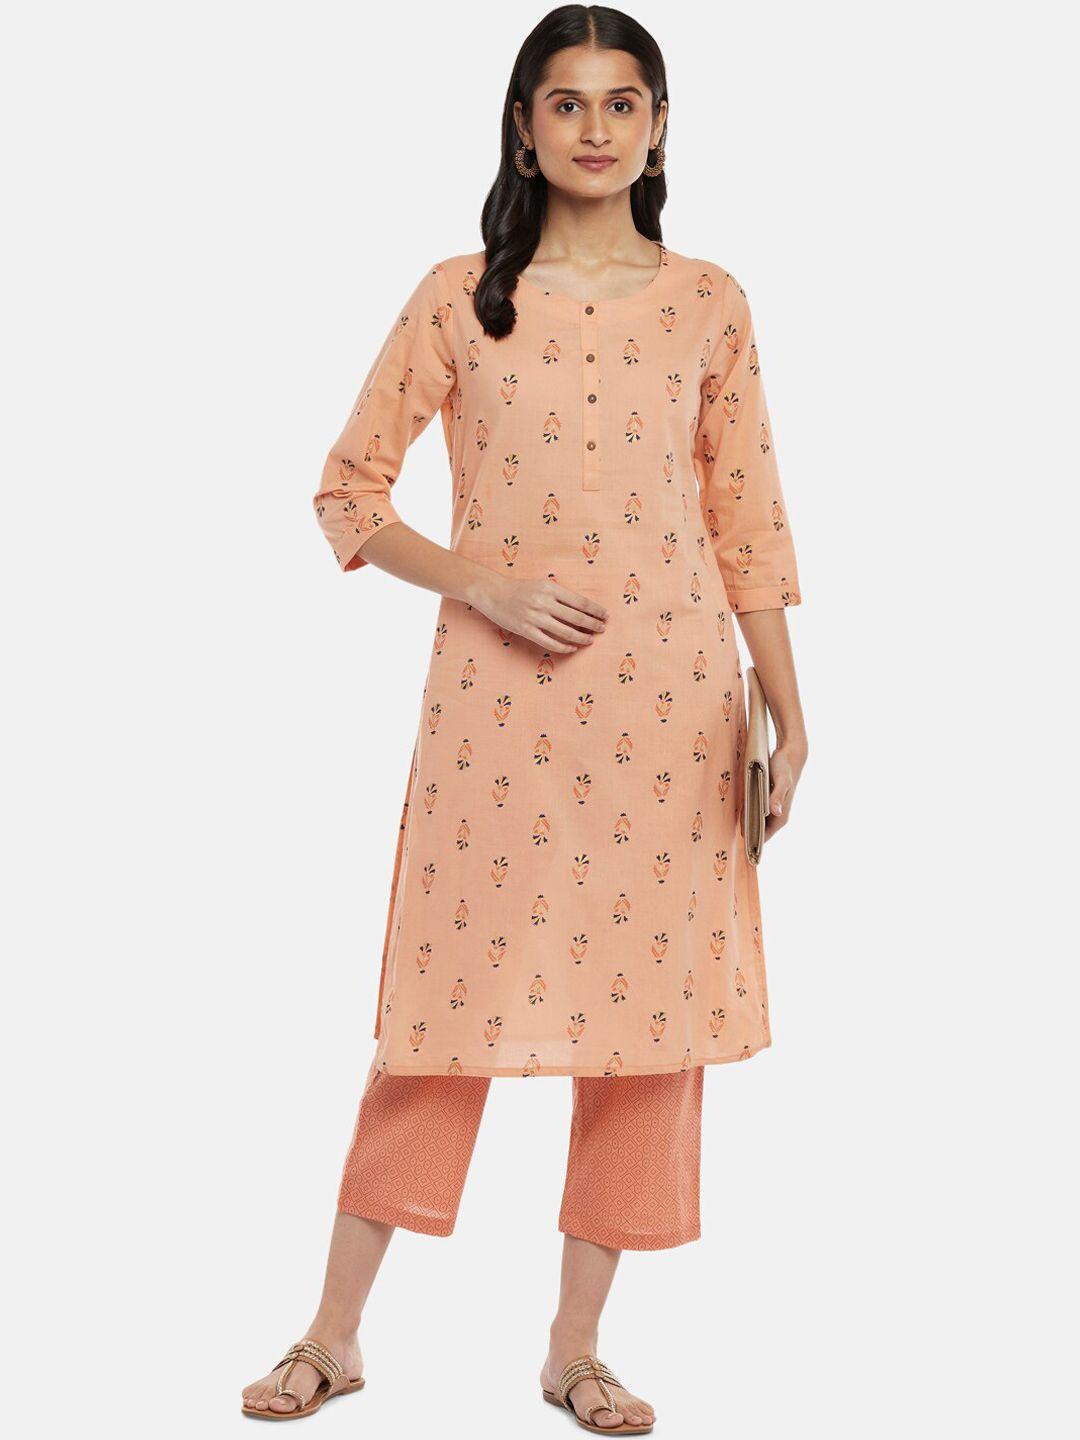 rangmanch by pantaloons women peach-coloured printed pure cotton kurta with trousers